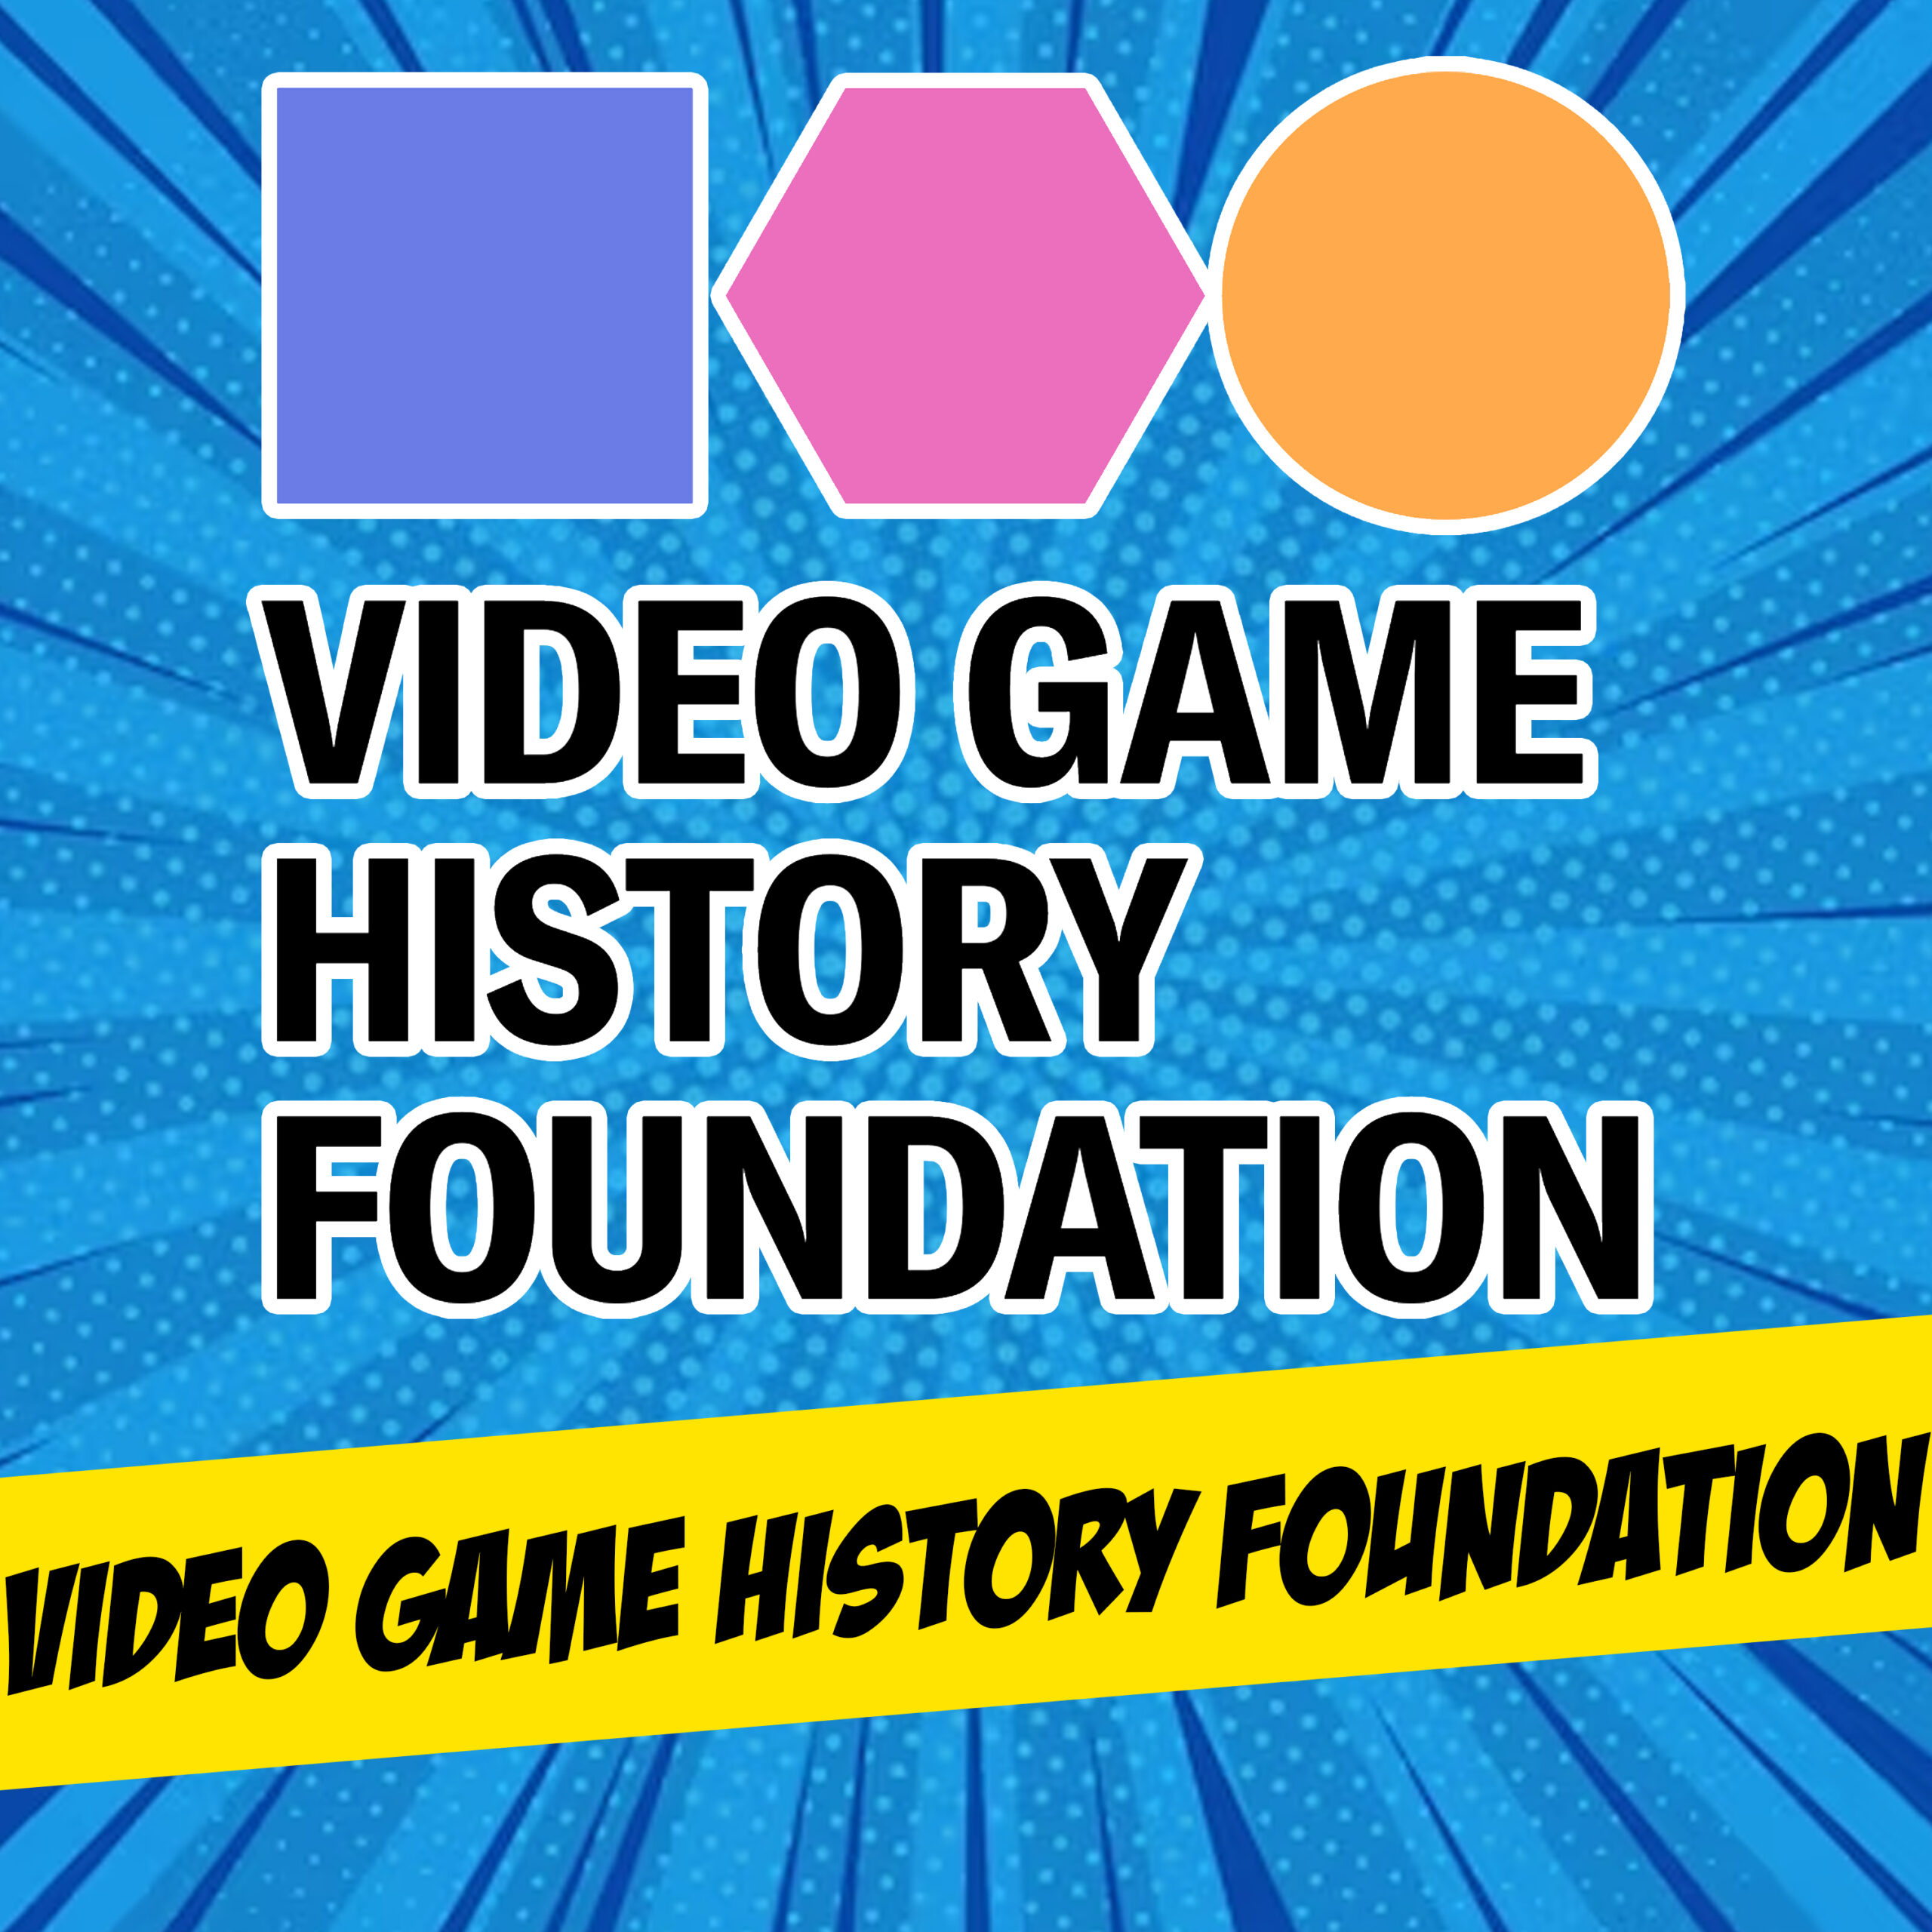 Preserving Our Past with the Video Game History Foundation